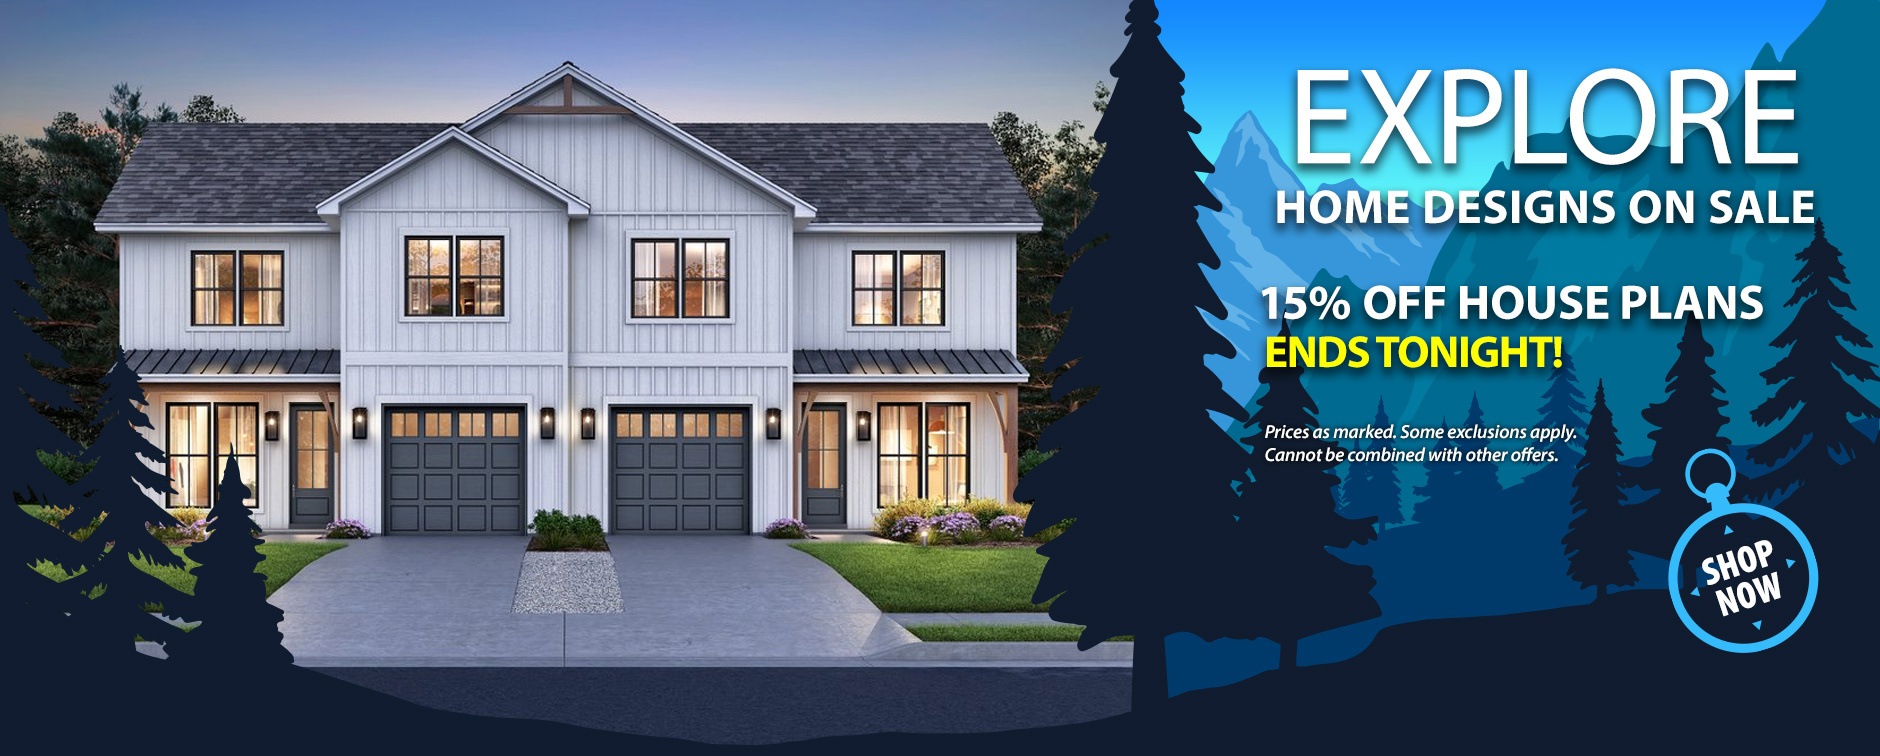 Get 15% Off House Plans. No Code Needed. Ends Tonight. Shop Now.